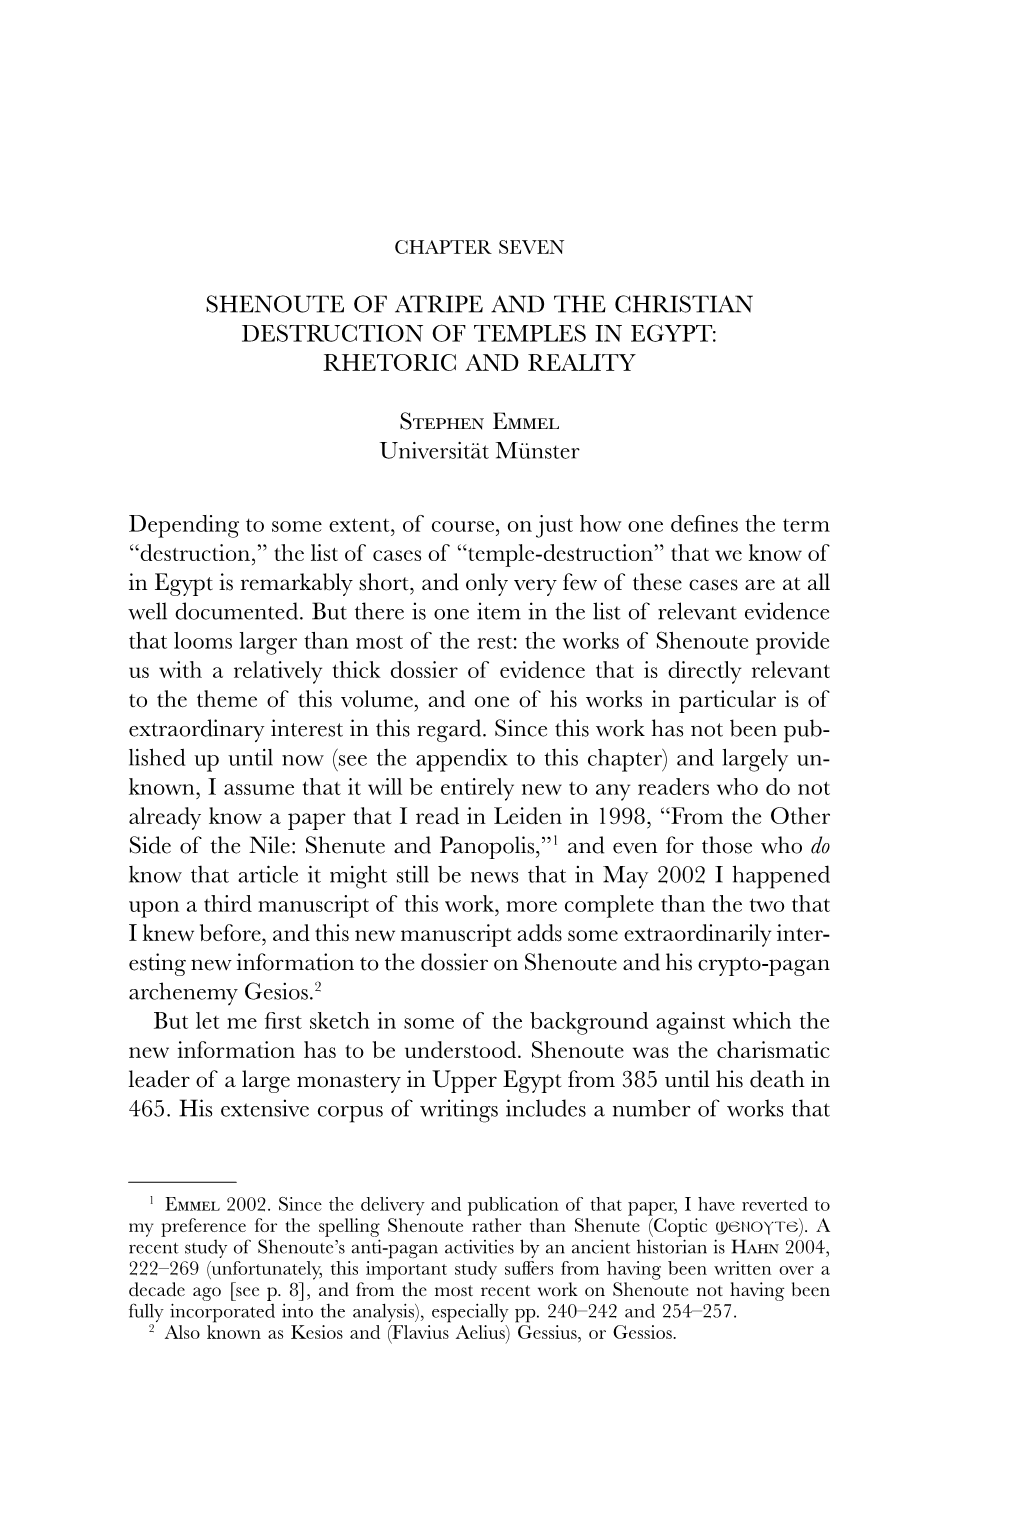 Shenoute of Atripe and the Christian Destruction of Temples in Egypt: Rhetoric and Reality